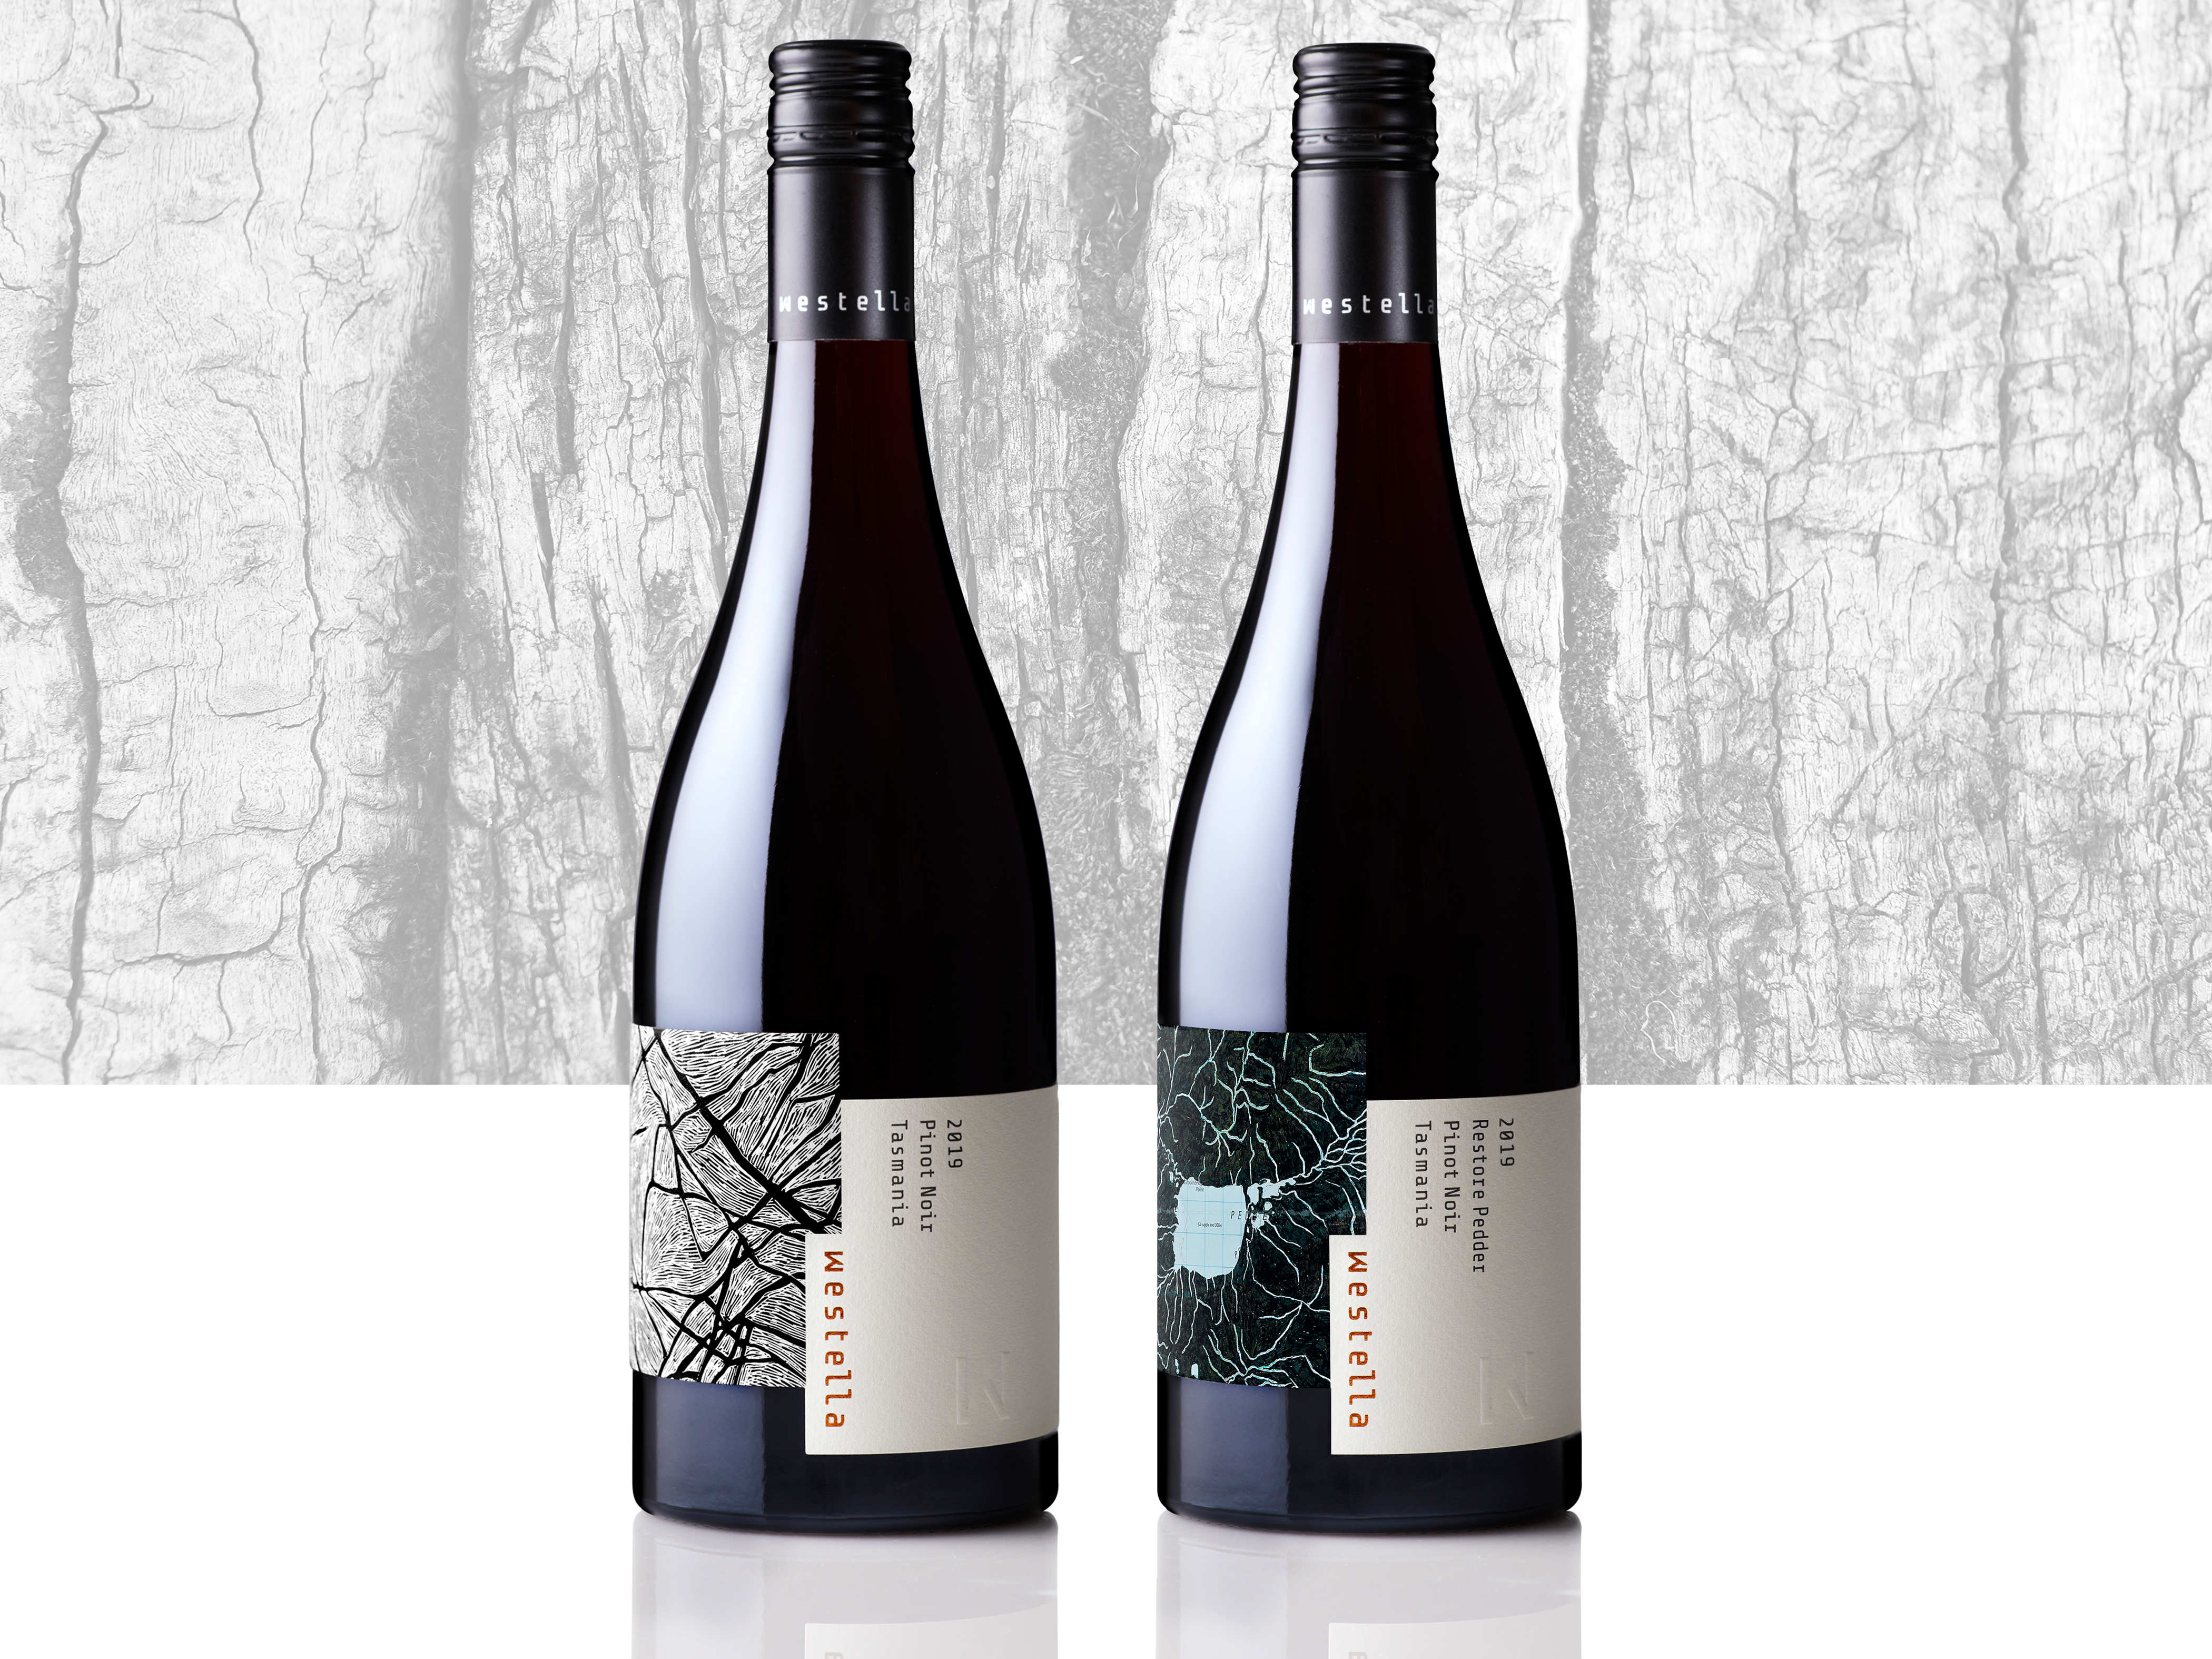 Two bottles of 2019 vintage Westella Pinot Noir sitting side by side against a backdrop of tree bark. Both bottles feature labels with artwork by Sue Lovegrove. The bottle on the left has the work titled, ‘The long walk, Skullbone Plains, Tasmania’ (2014) which is a black and white abstract pattern. The bottle on the right is a special release label featuring a detail from ‘Mapping the invisible, [reconstructed map]’ (2021) that Sue created for the water[shed] exhibition.